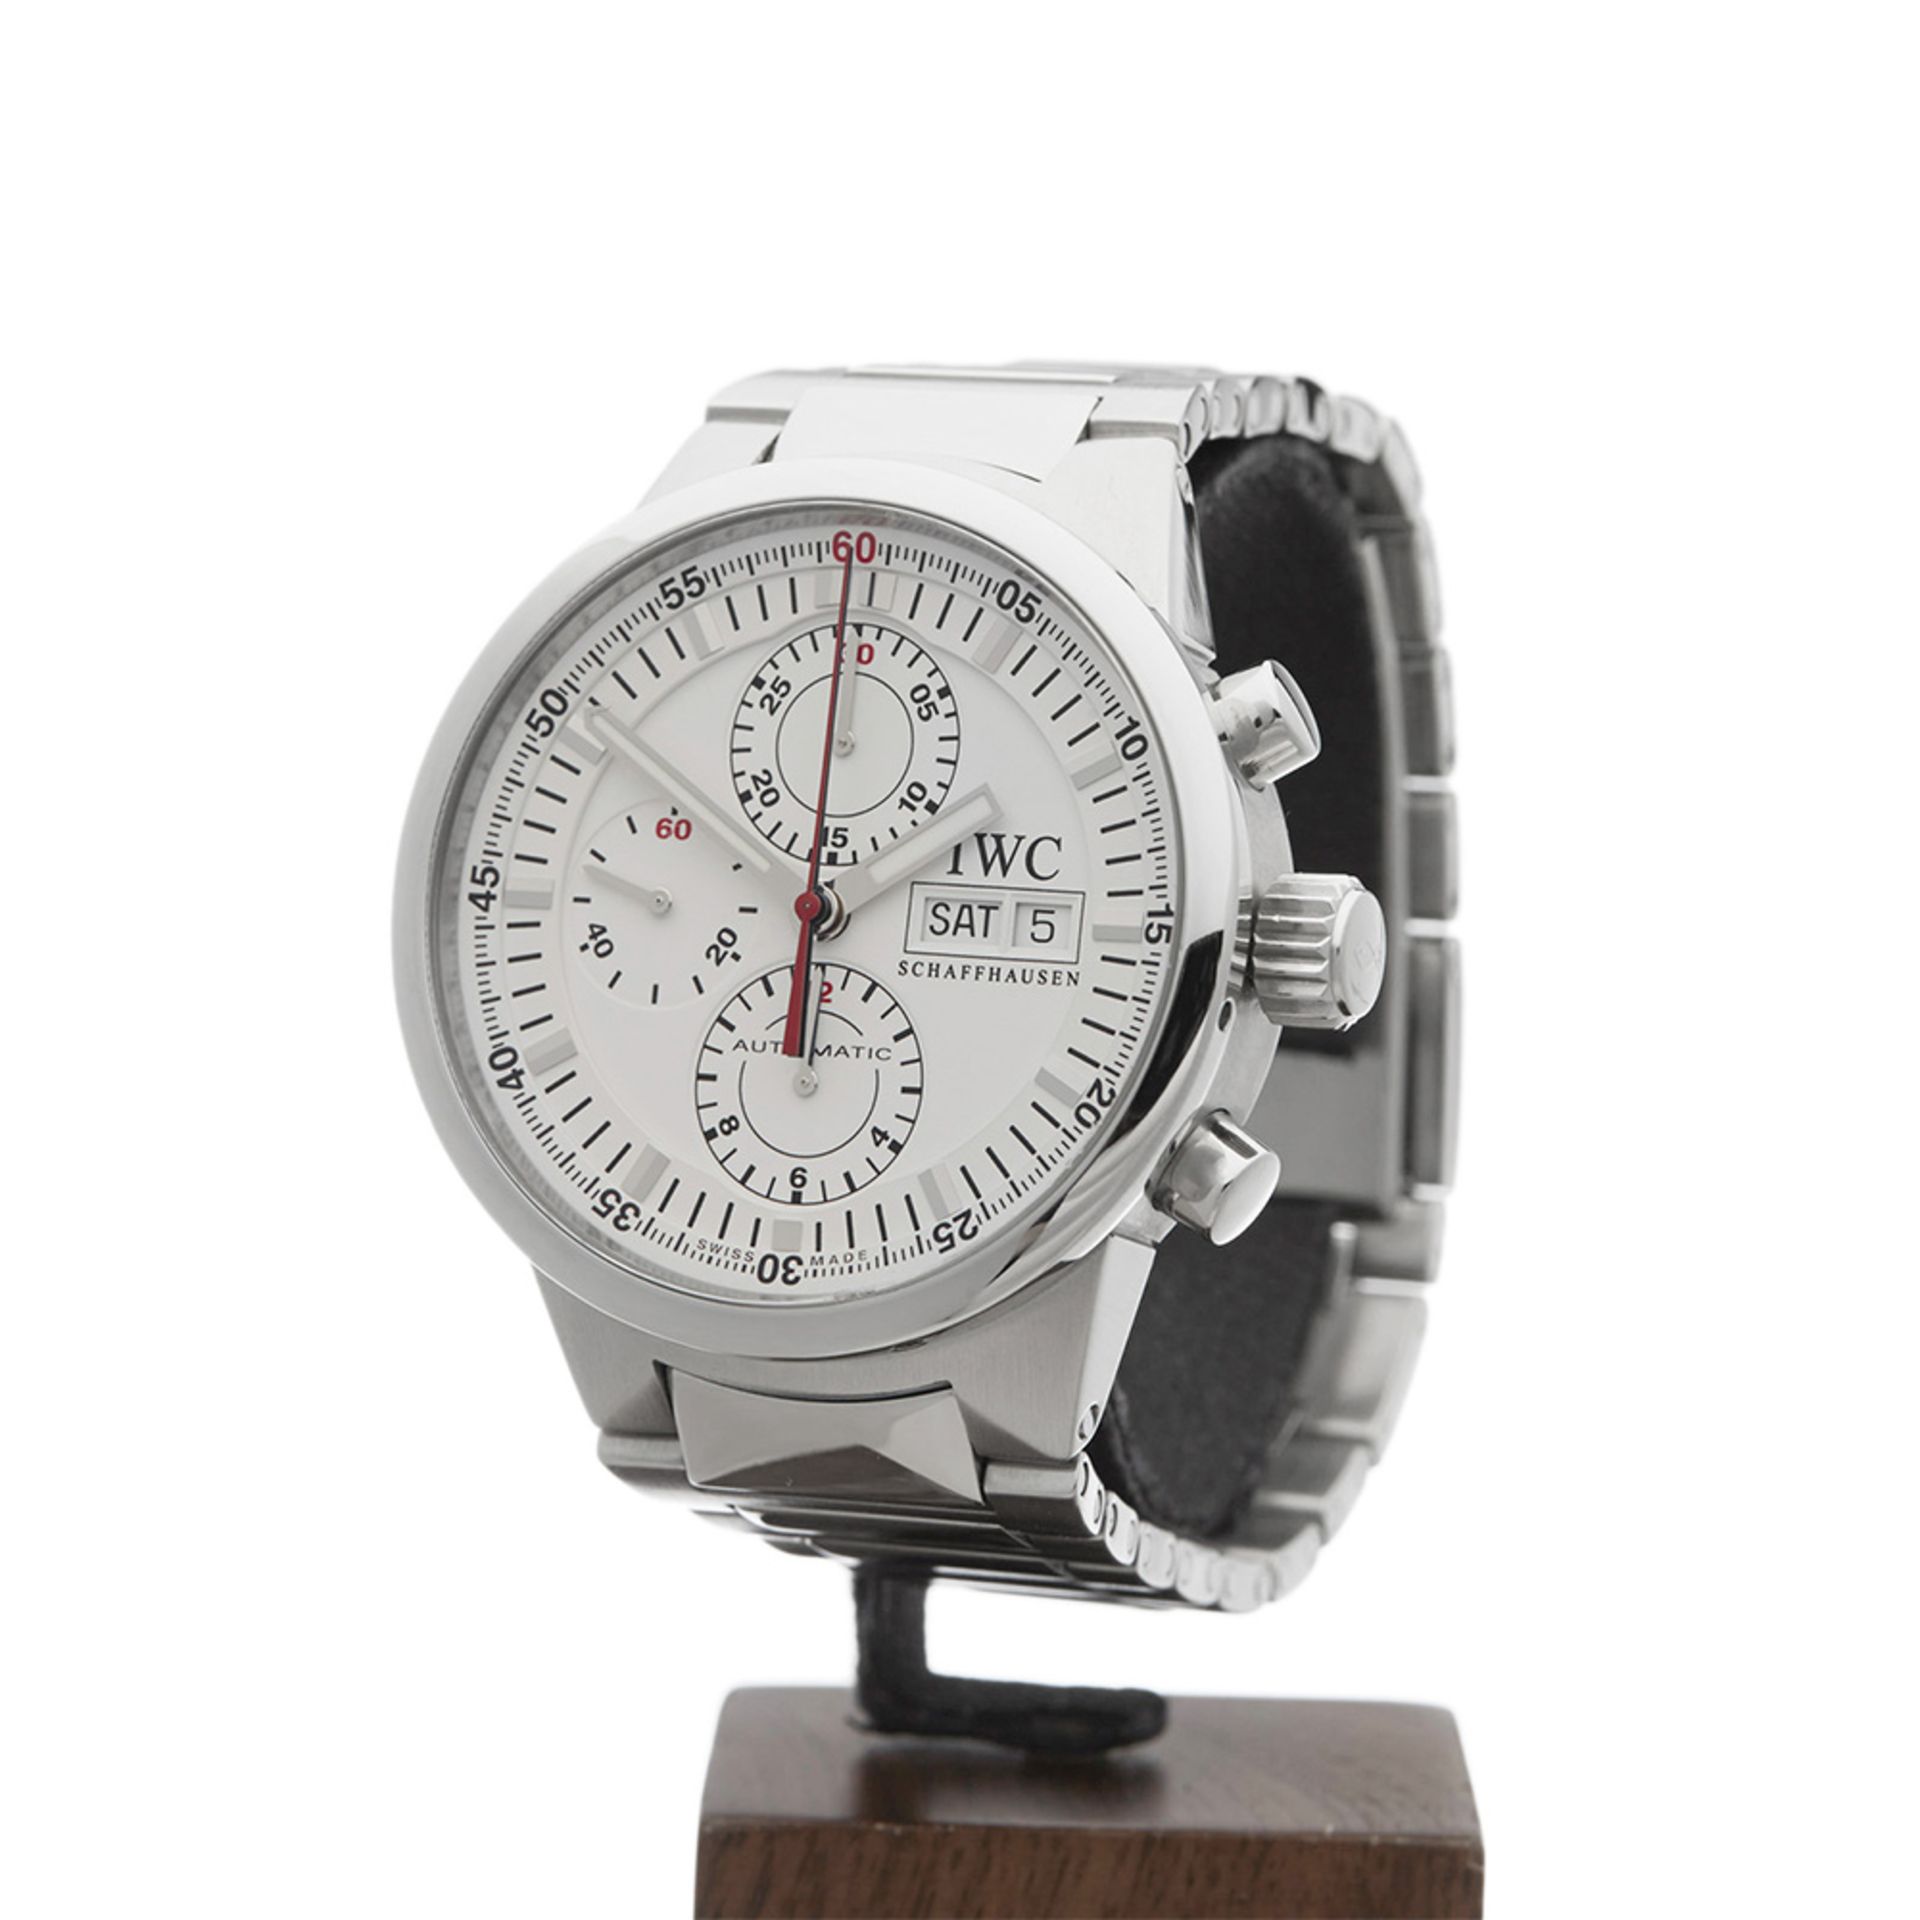 IWC, GST Rattrapante 43mm Stainless Steel IW371523 - Image 3 of 9